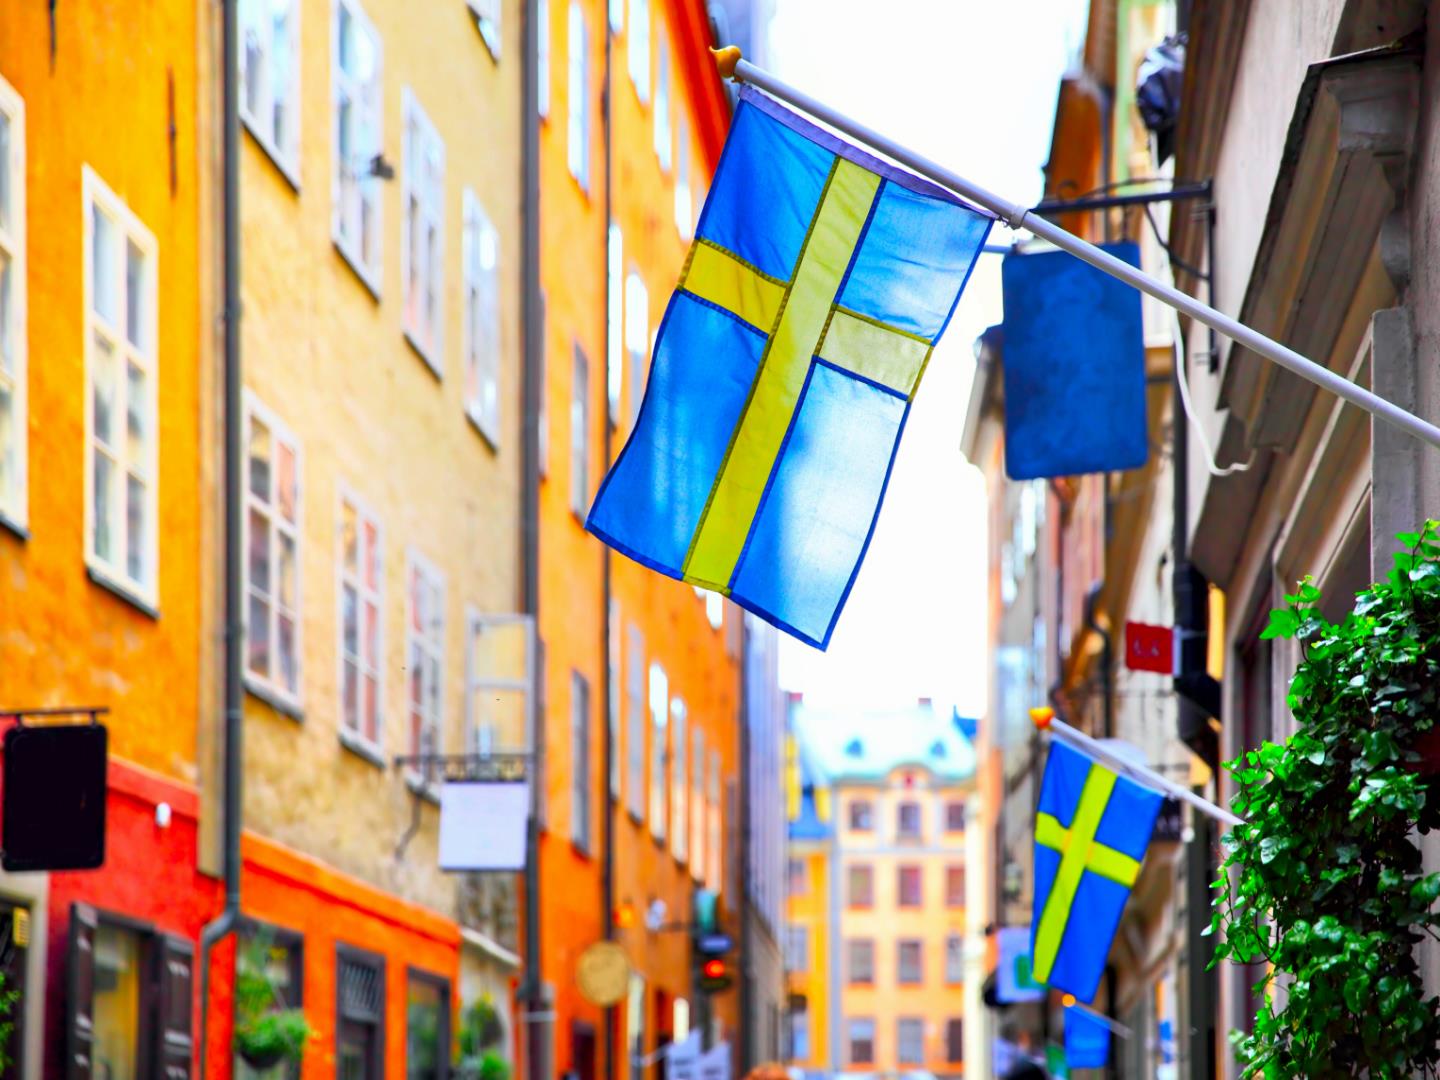 SWEDEN SUSPENDS MODERNA VACCINE FOR THOSE 30 AND UNDER